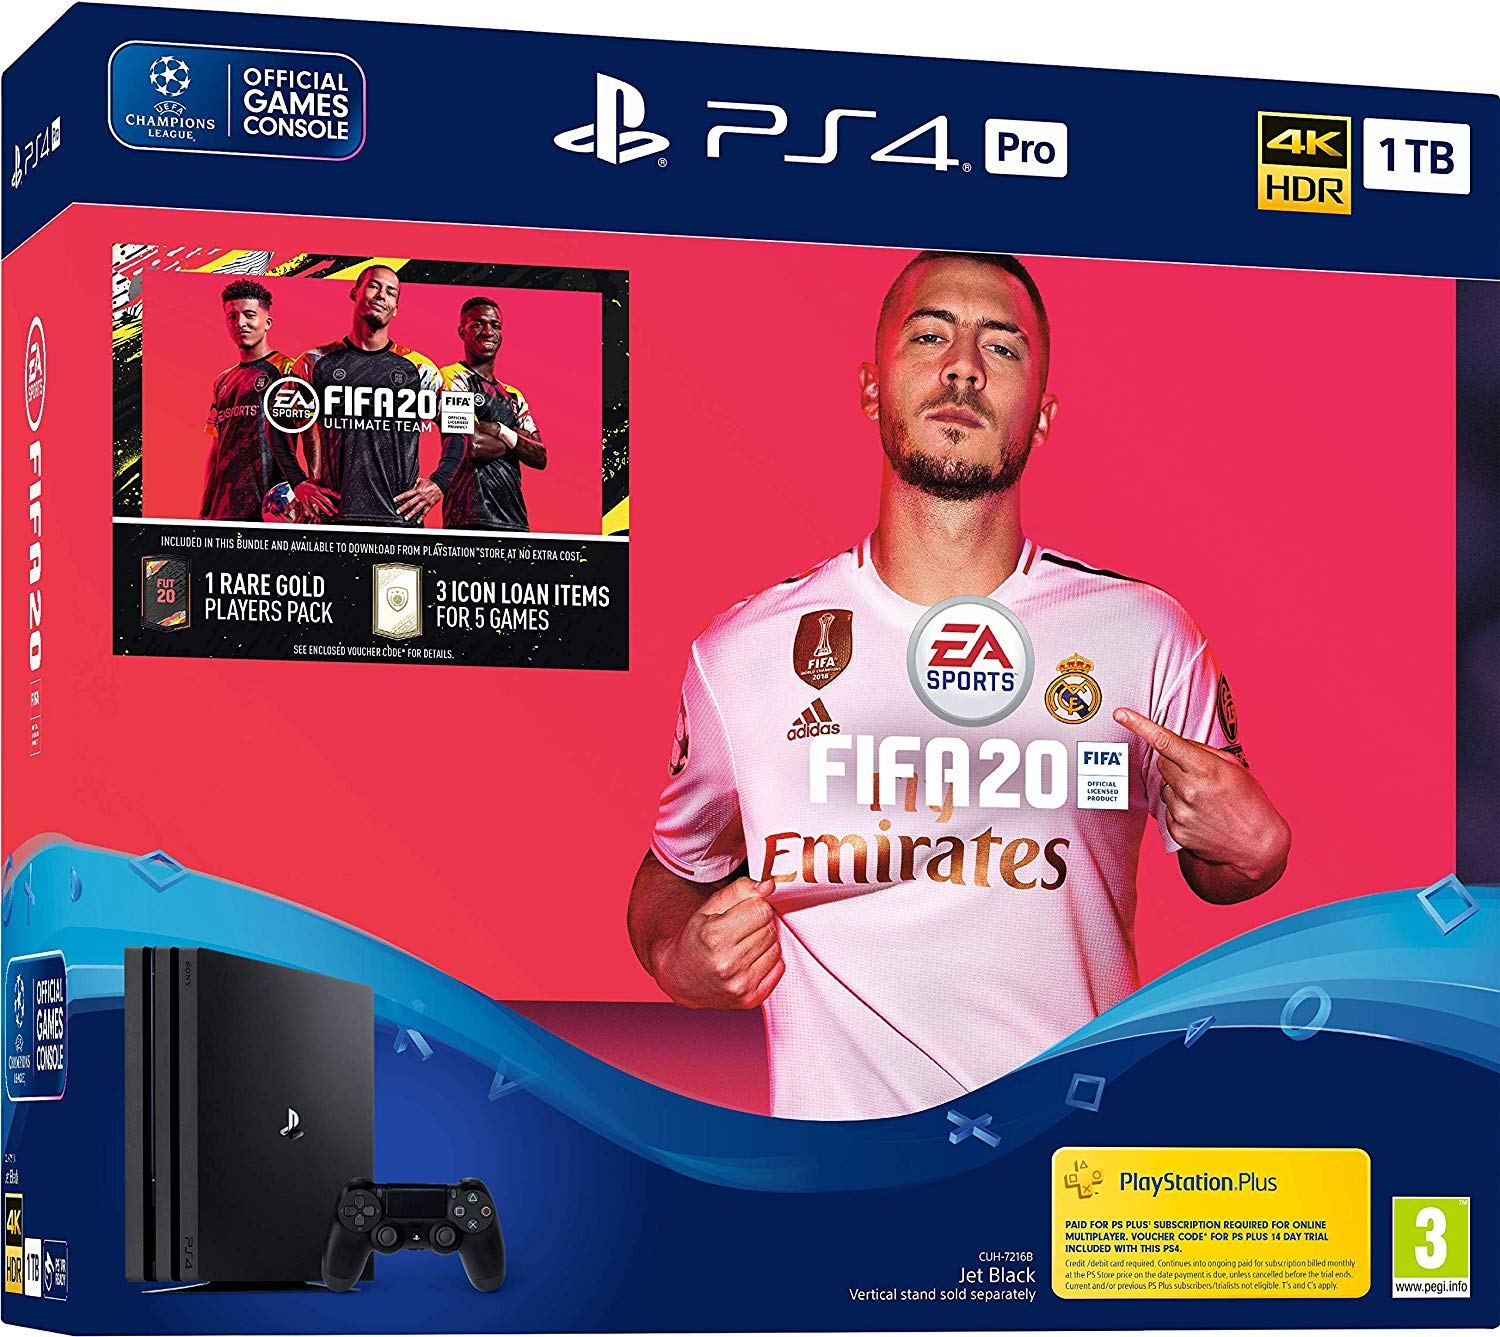 James Dyson pollution Change clothes PlayStation 4 Pro 1TB HDD (FIFA 20 Bundle)